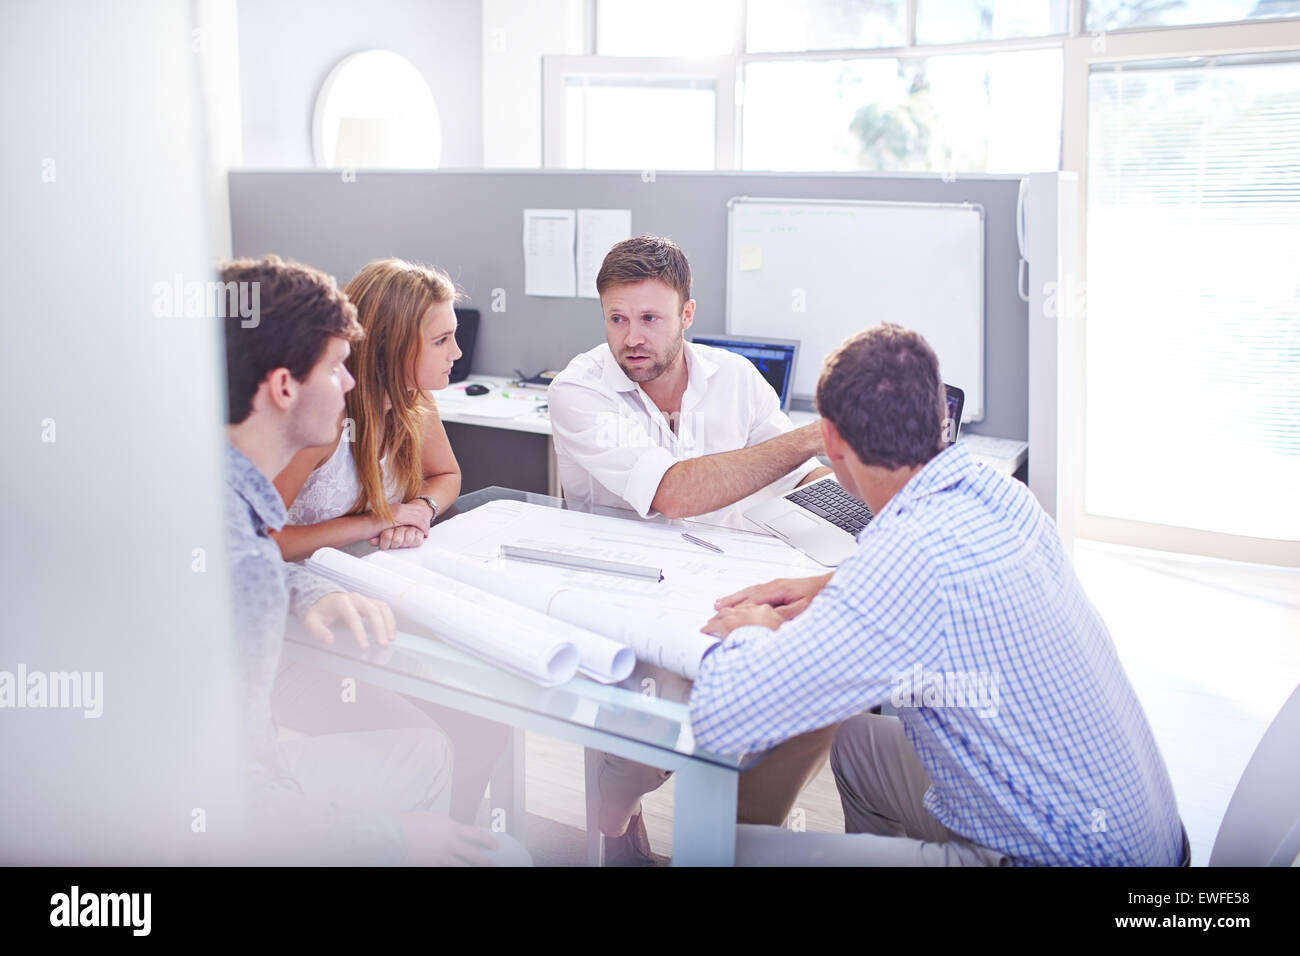 Architects discussing blueprints in meeting in office Stock Photo